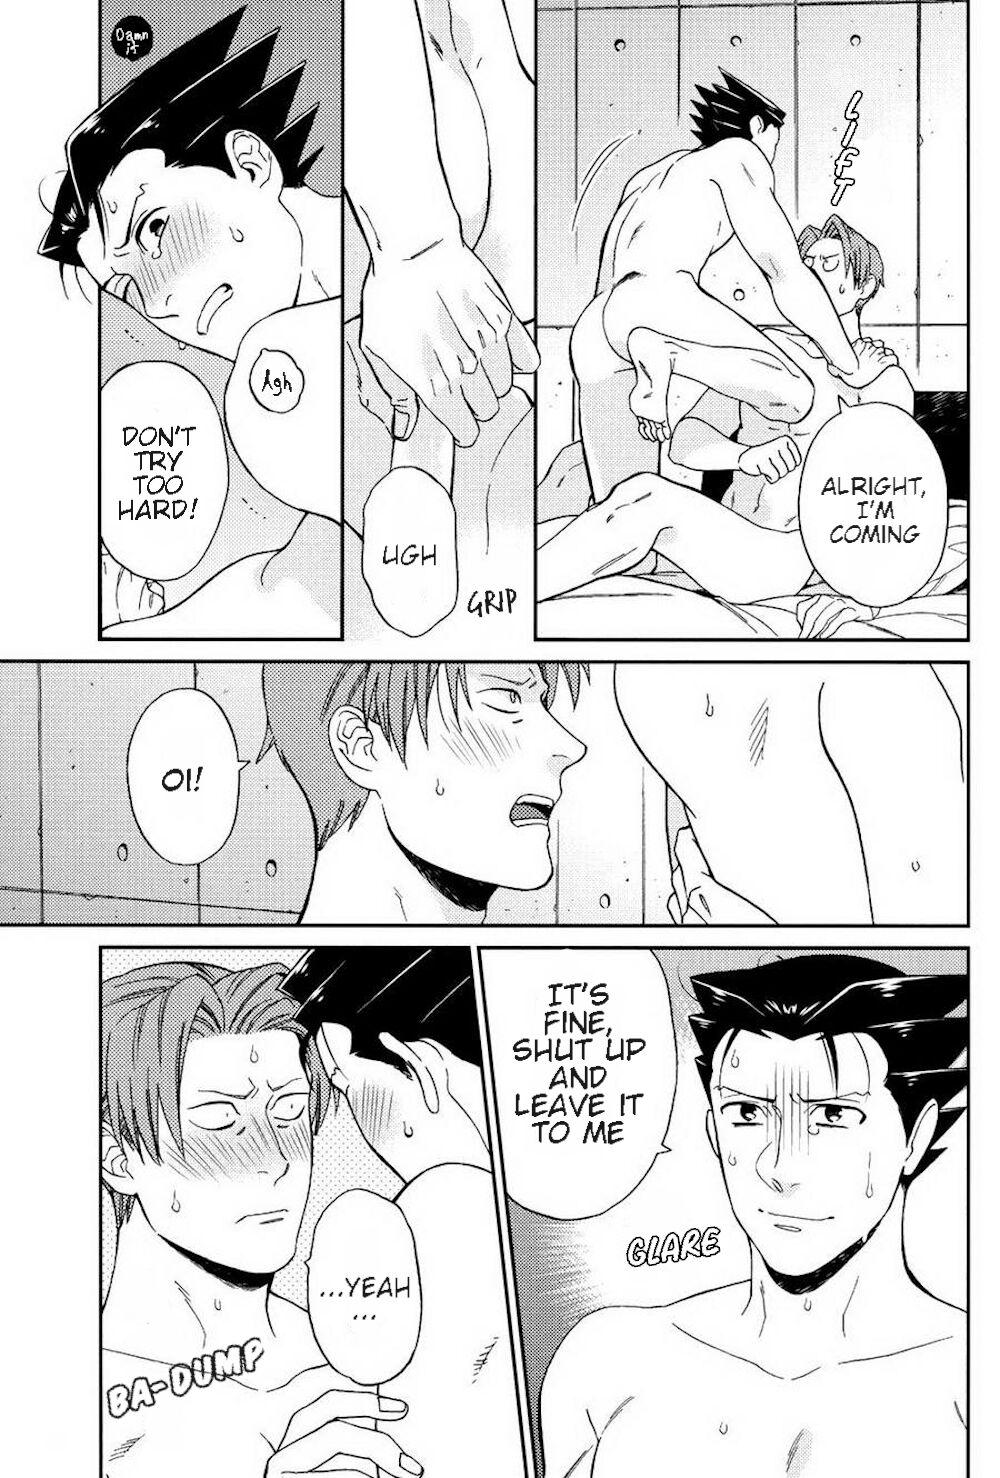 Sex Kid who can do it if he tries, kid who can't - Ace attorney | gyakuten saiban Gay Cumjerkingoff - Page 10